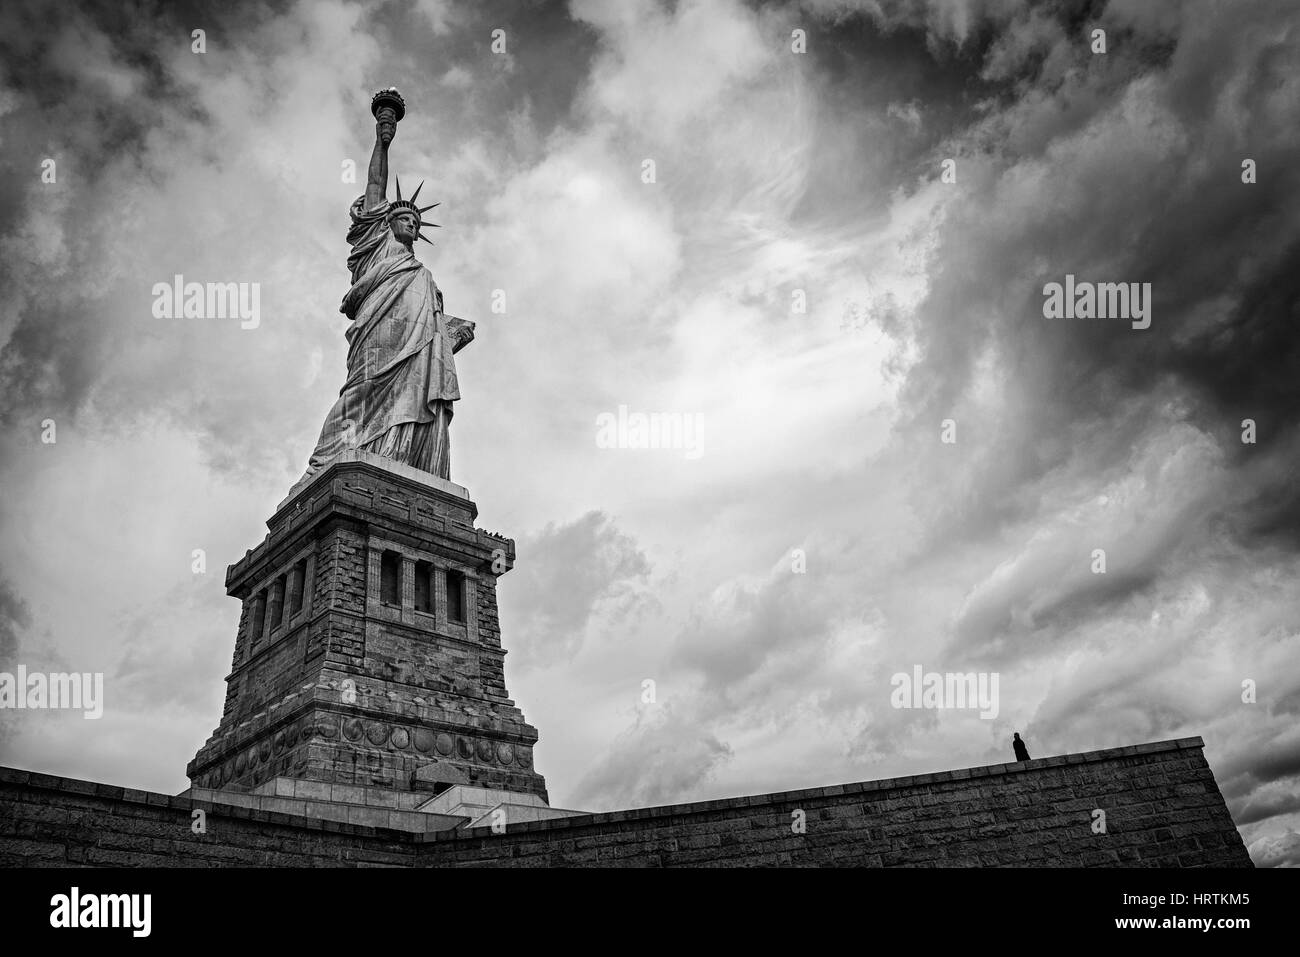 Sihouette of a lone figure looking up at the Statue of Liberty Stock Photo